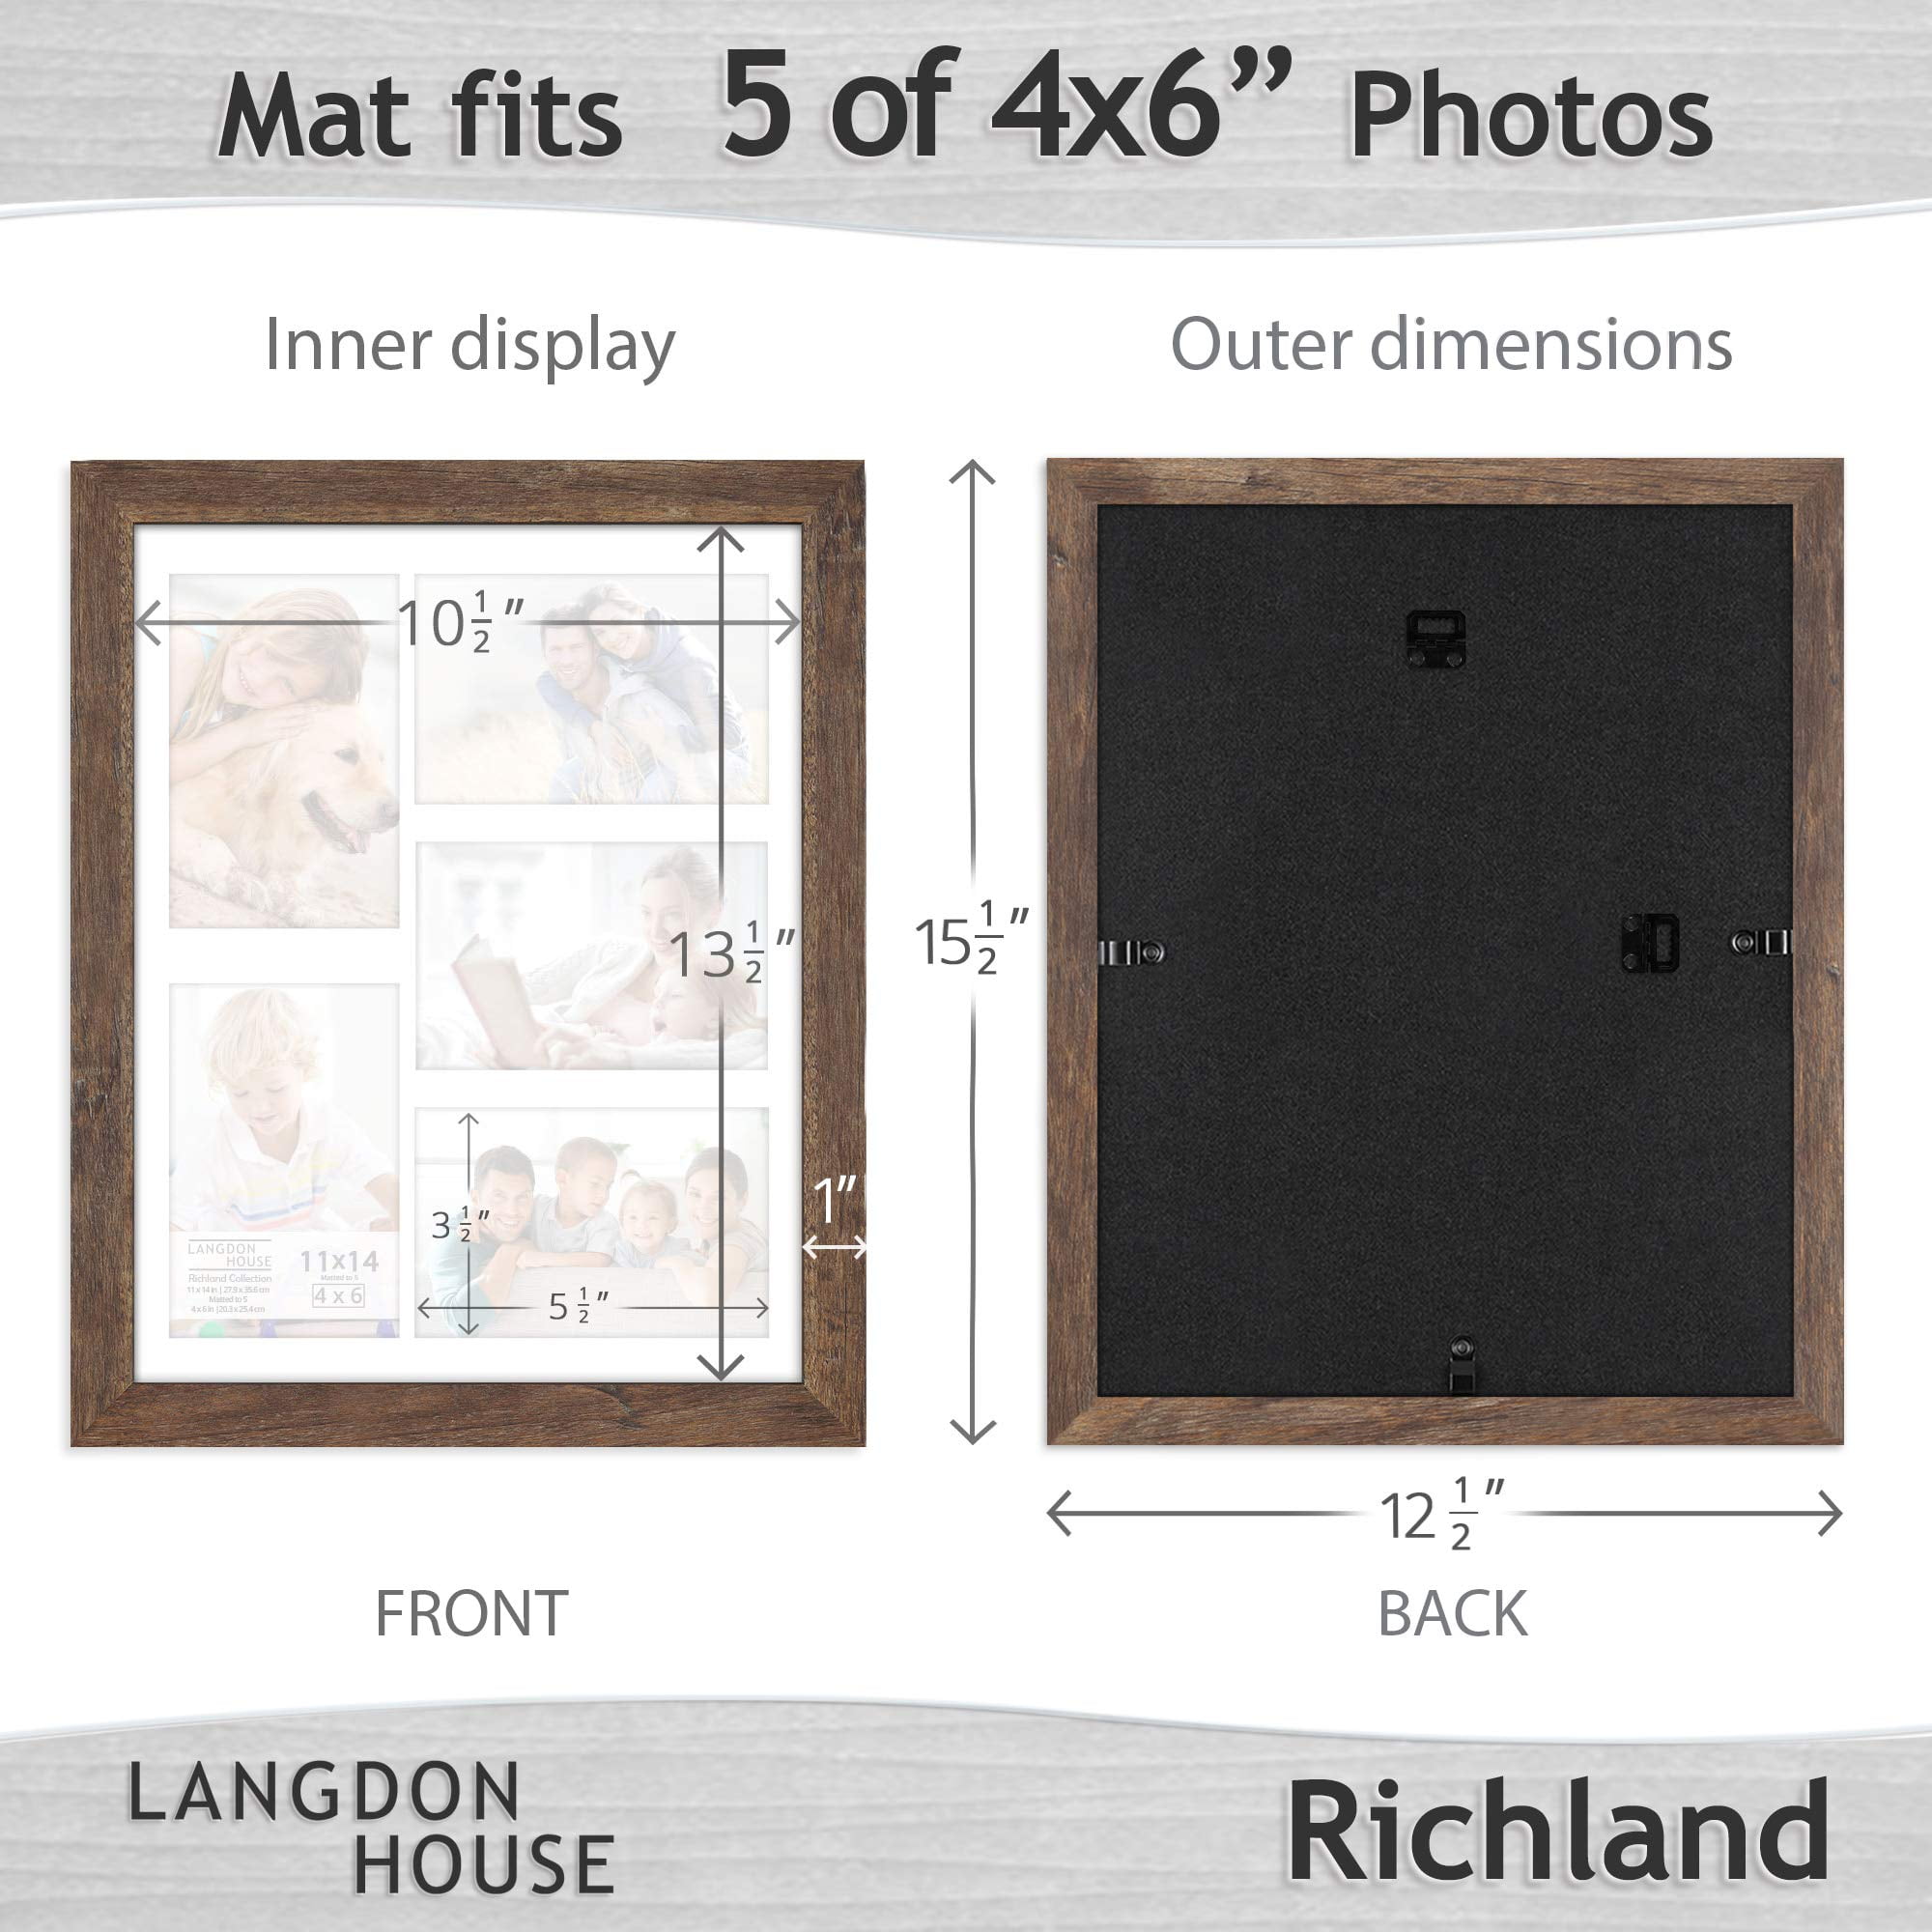 Langdon House 4x6 Picture Frames (Almond White, 3 Pack) Wood Grain Style, Wall Mount or Table Top, Richland Collection